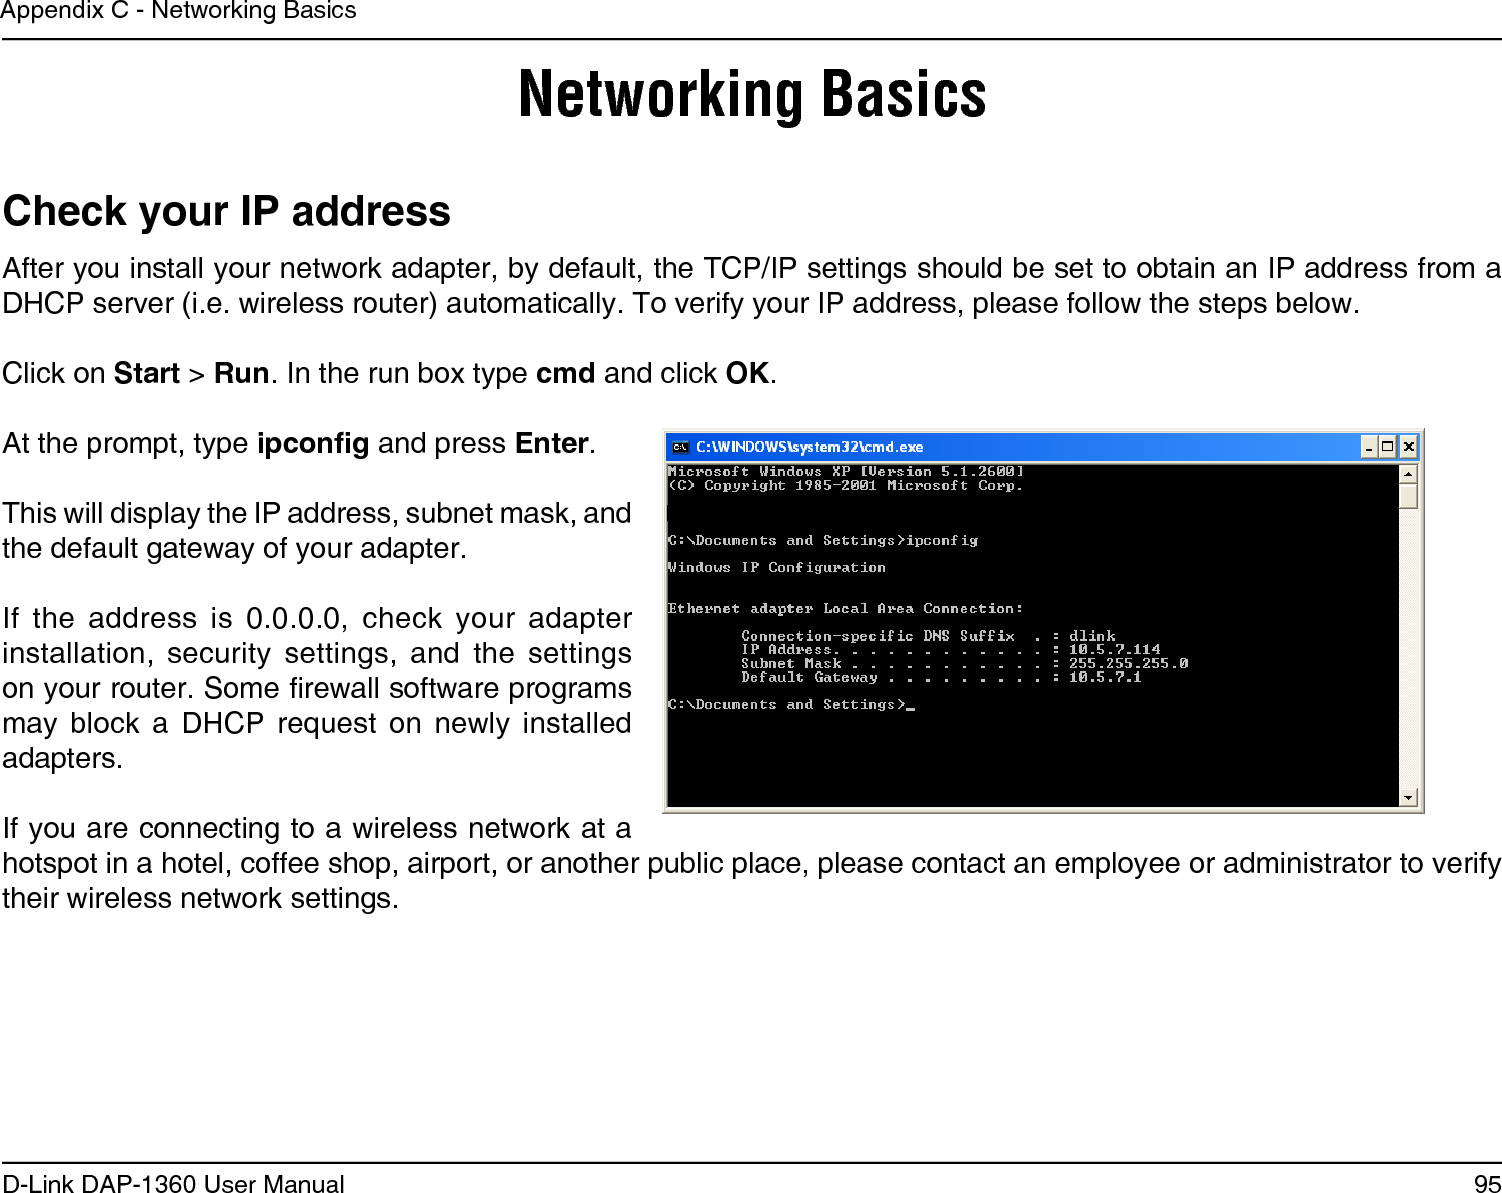 95D-Link DAP-1360 User ManualAppendix C - Networking BasicsNetworking BasicsCheck your IP addressAfter you install your network adapter, by default, the TCP/IP settings should be set to obtain an IP address from a DHCP server (i.e. wireless router) automatically. To verify your IP address, please follow the steps below.Click on Start &gt; Run. In the run box type cmd and click OK.At the prompt, type ipcong and press Enter.This will display the IP address, subnet mask, and the default gateway of your adapter.If  the  address  is  0.0.0.0,  check  your  adapter installation,  security  settings,  and  the  settings on your router. Some rewall software programs may  block  a  DHCP  request  on  newly  installed adapters. If you are connecting to a wireless network at a hotspot in a hotel, coffee shop, airport, or another public place, please contact an employee or administrator to verify their wireless network settings.